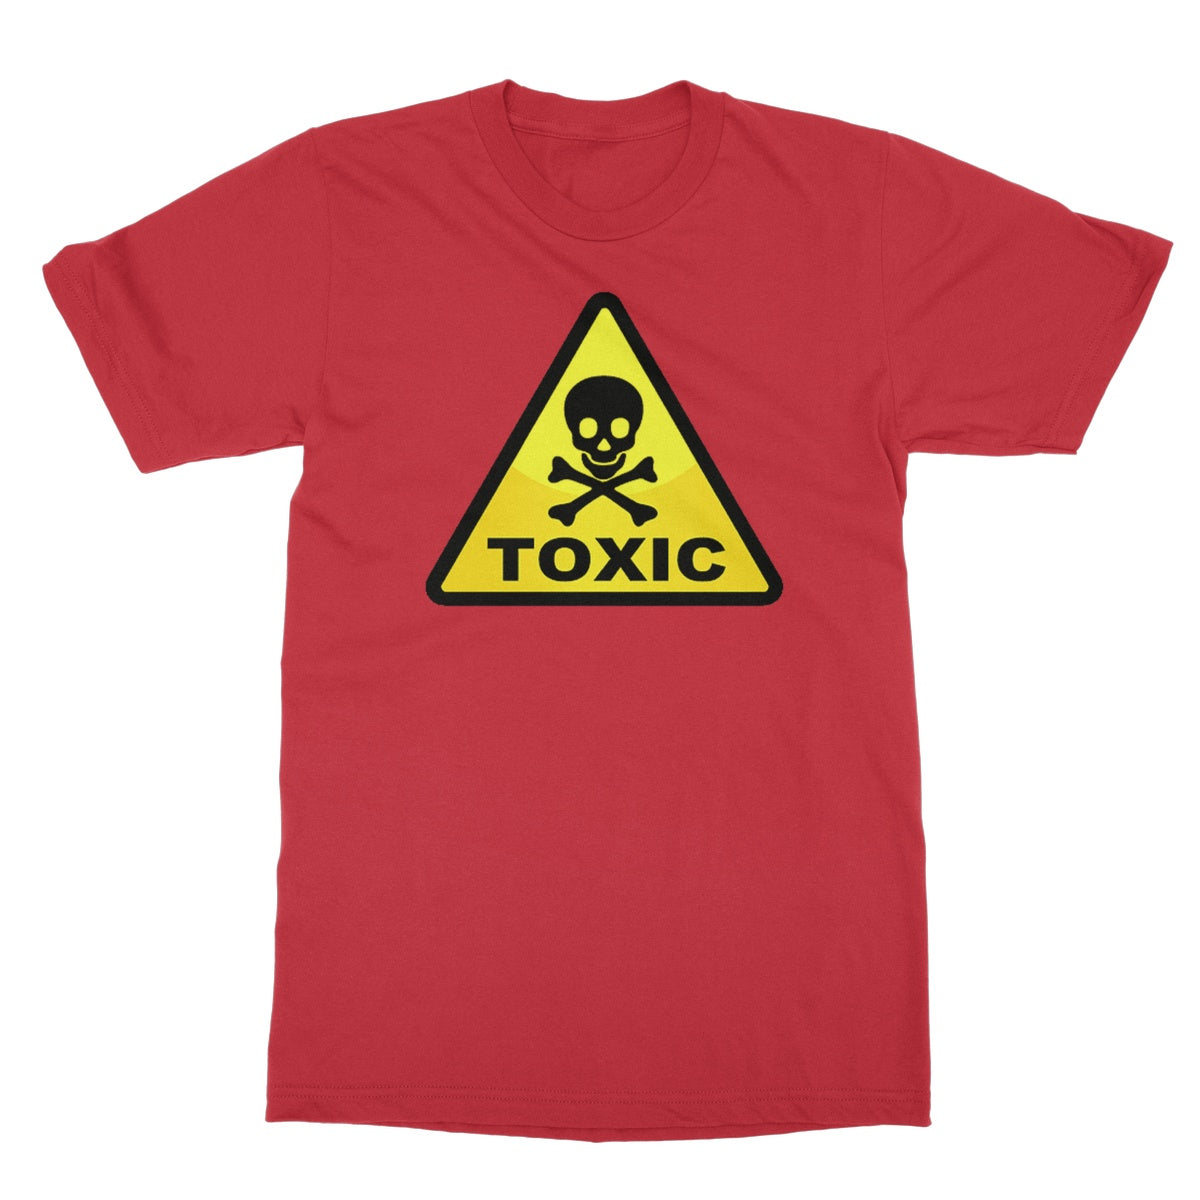 toxic t shirt red